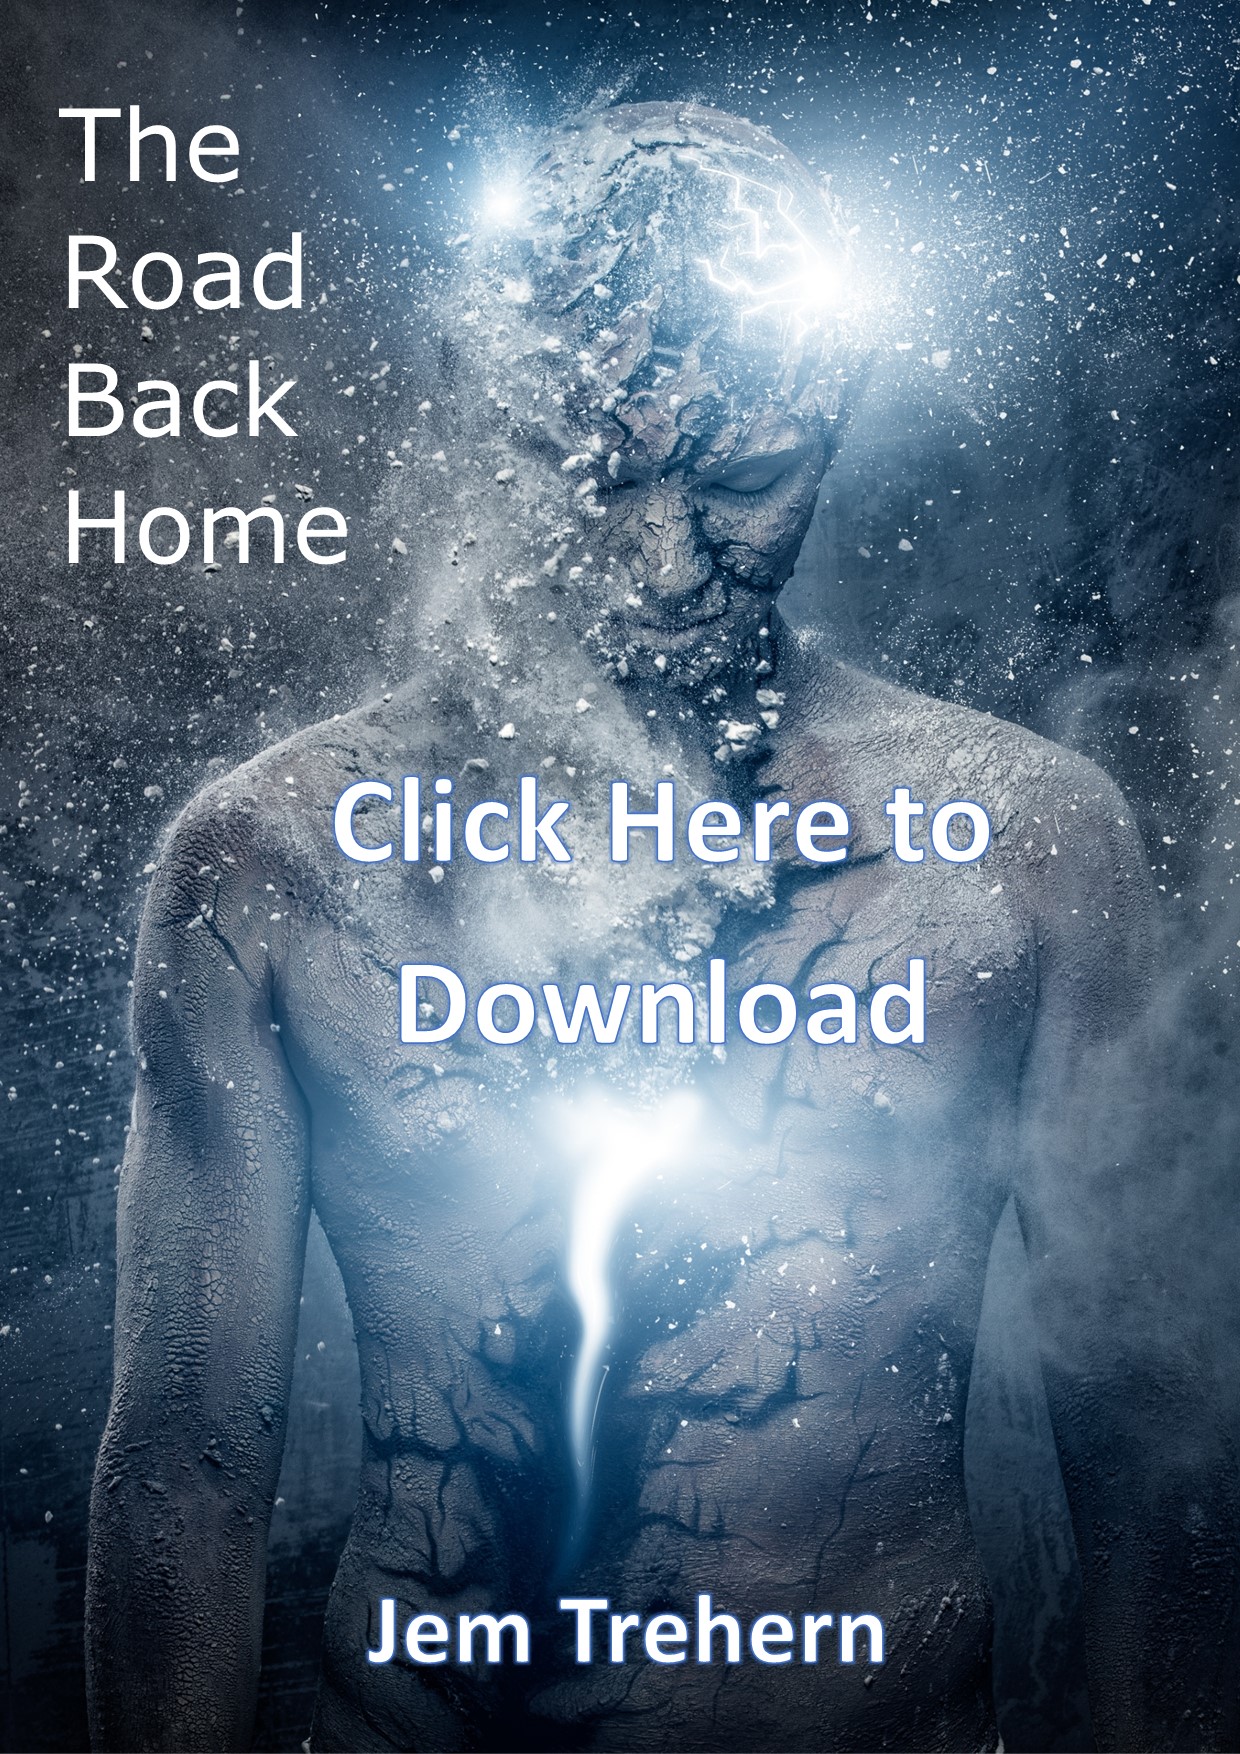 The way home Download link